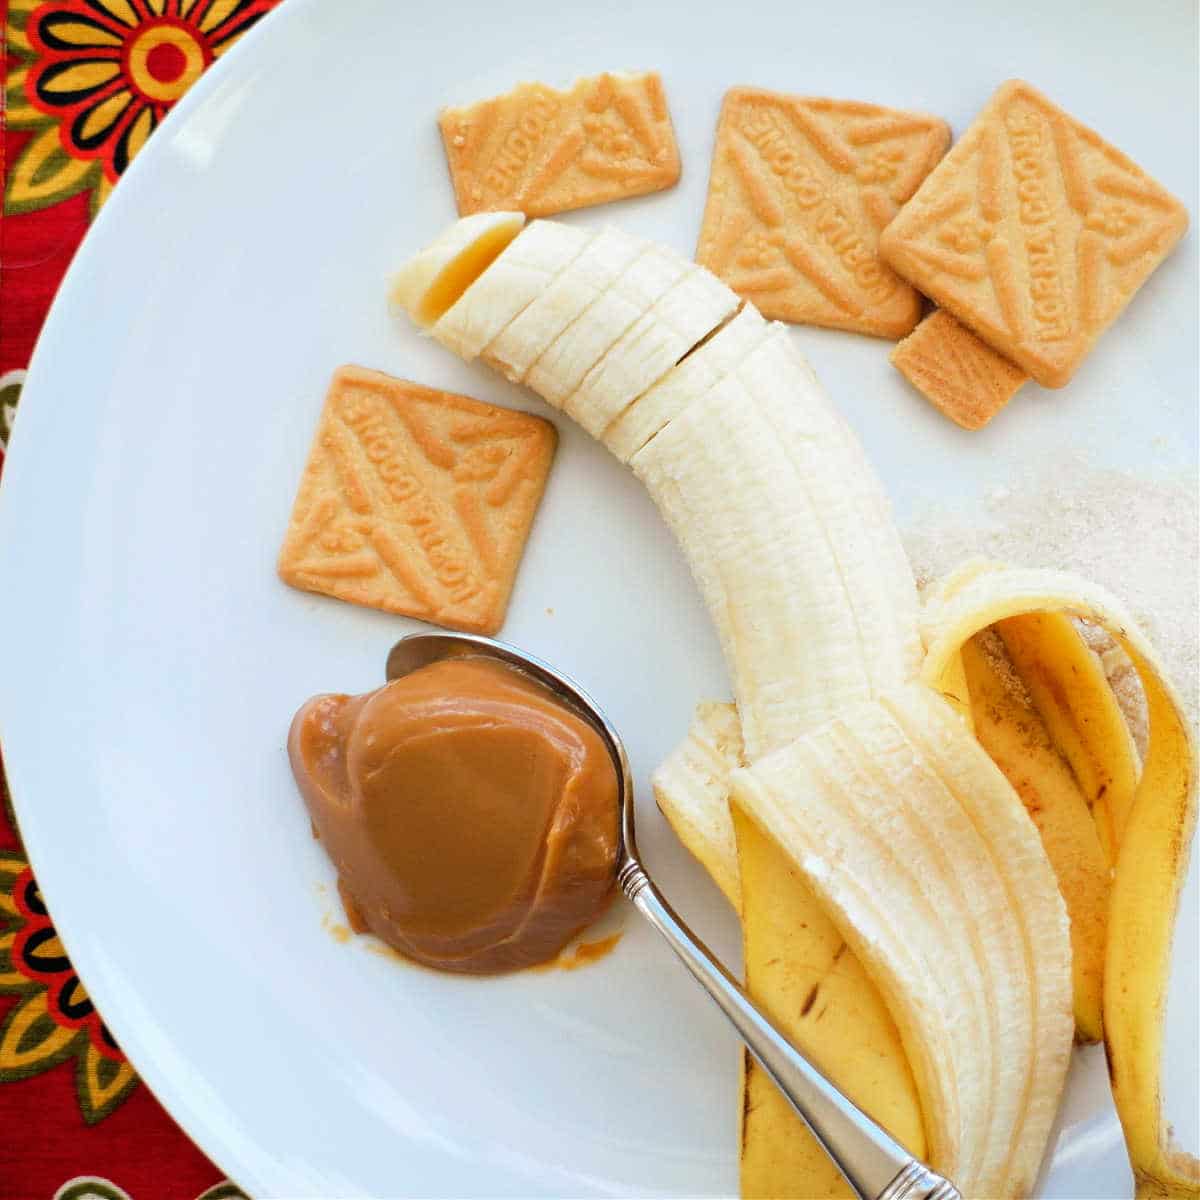 An overhead shot of a sliced banana, some Lorna Doone cookies, and a spoonful of dulce de leche on a white plate.